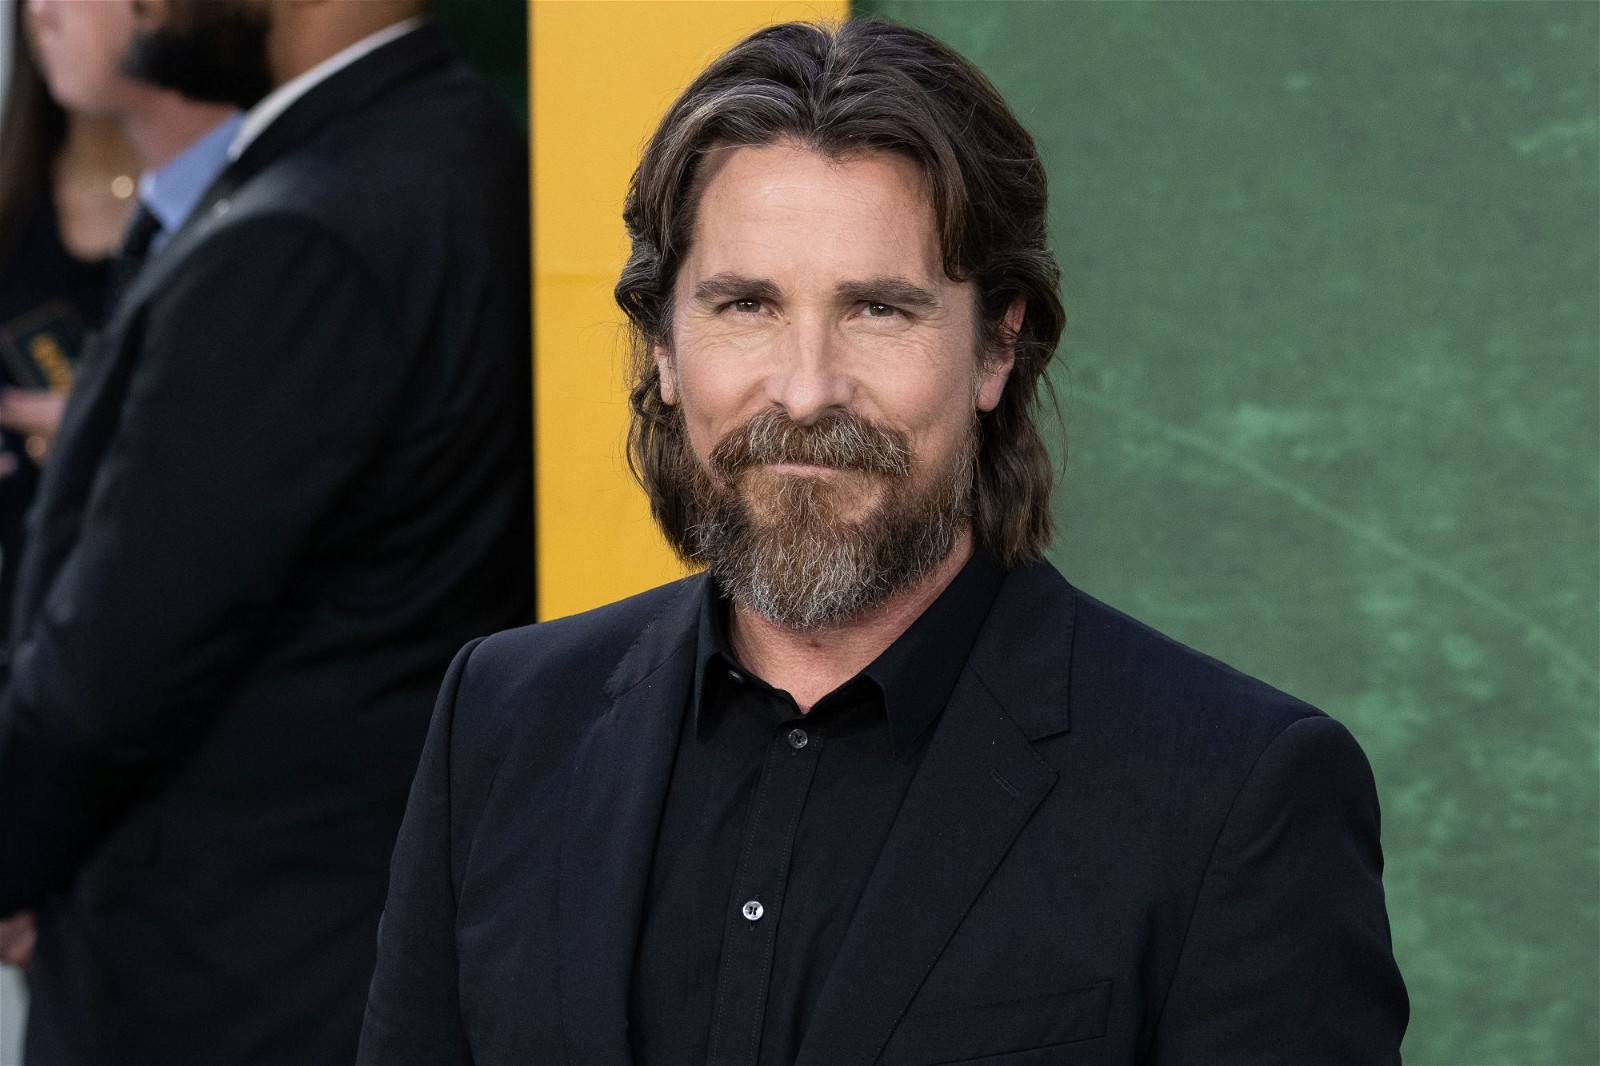 Christian Bale at an event